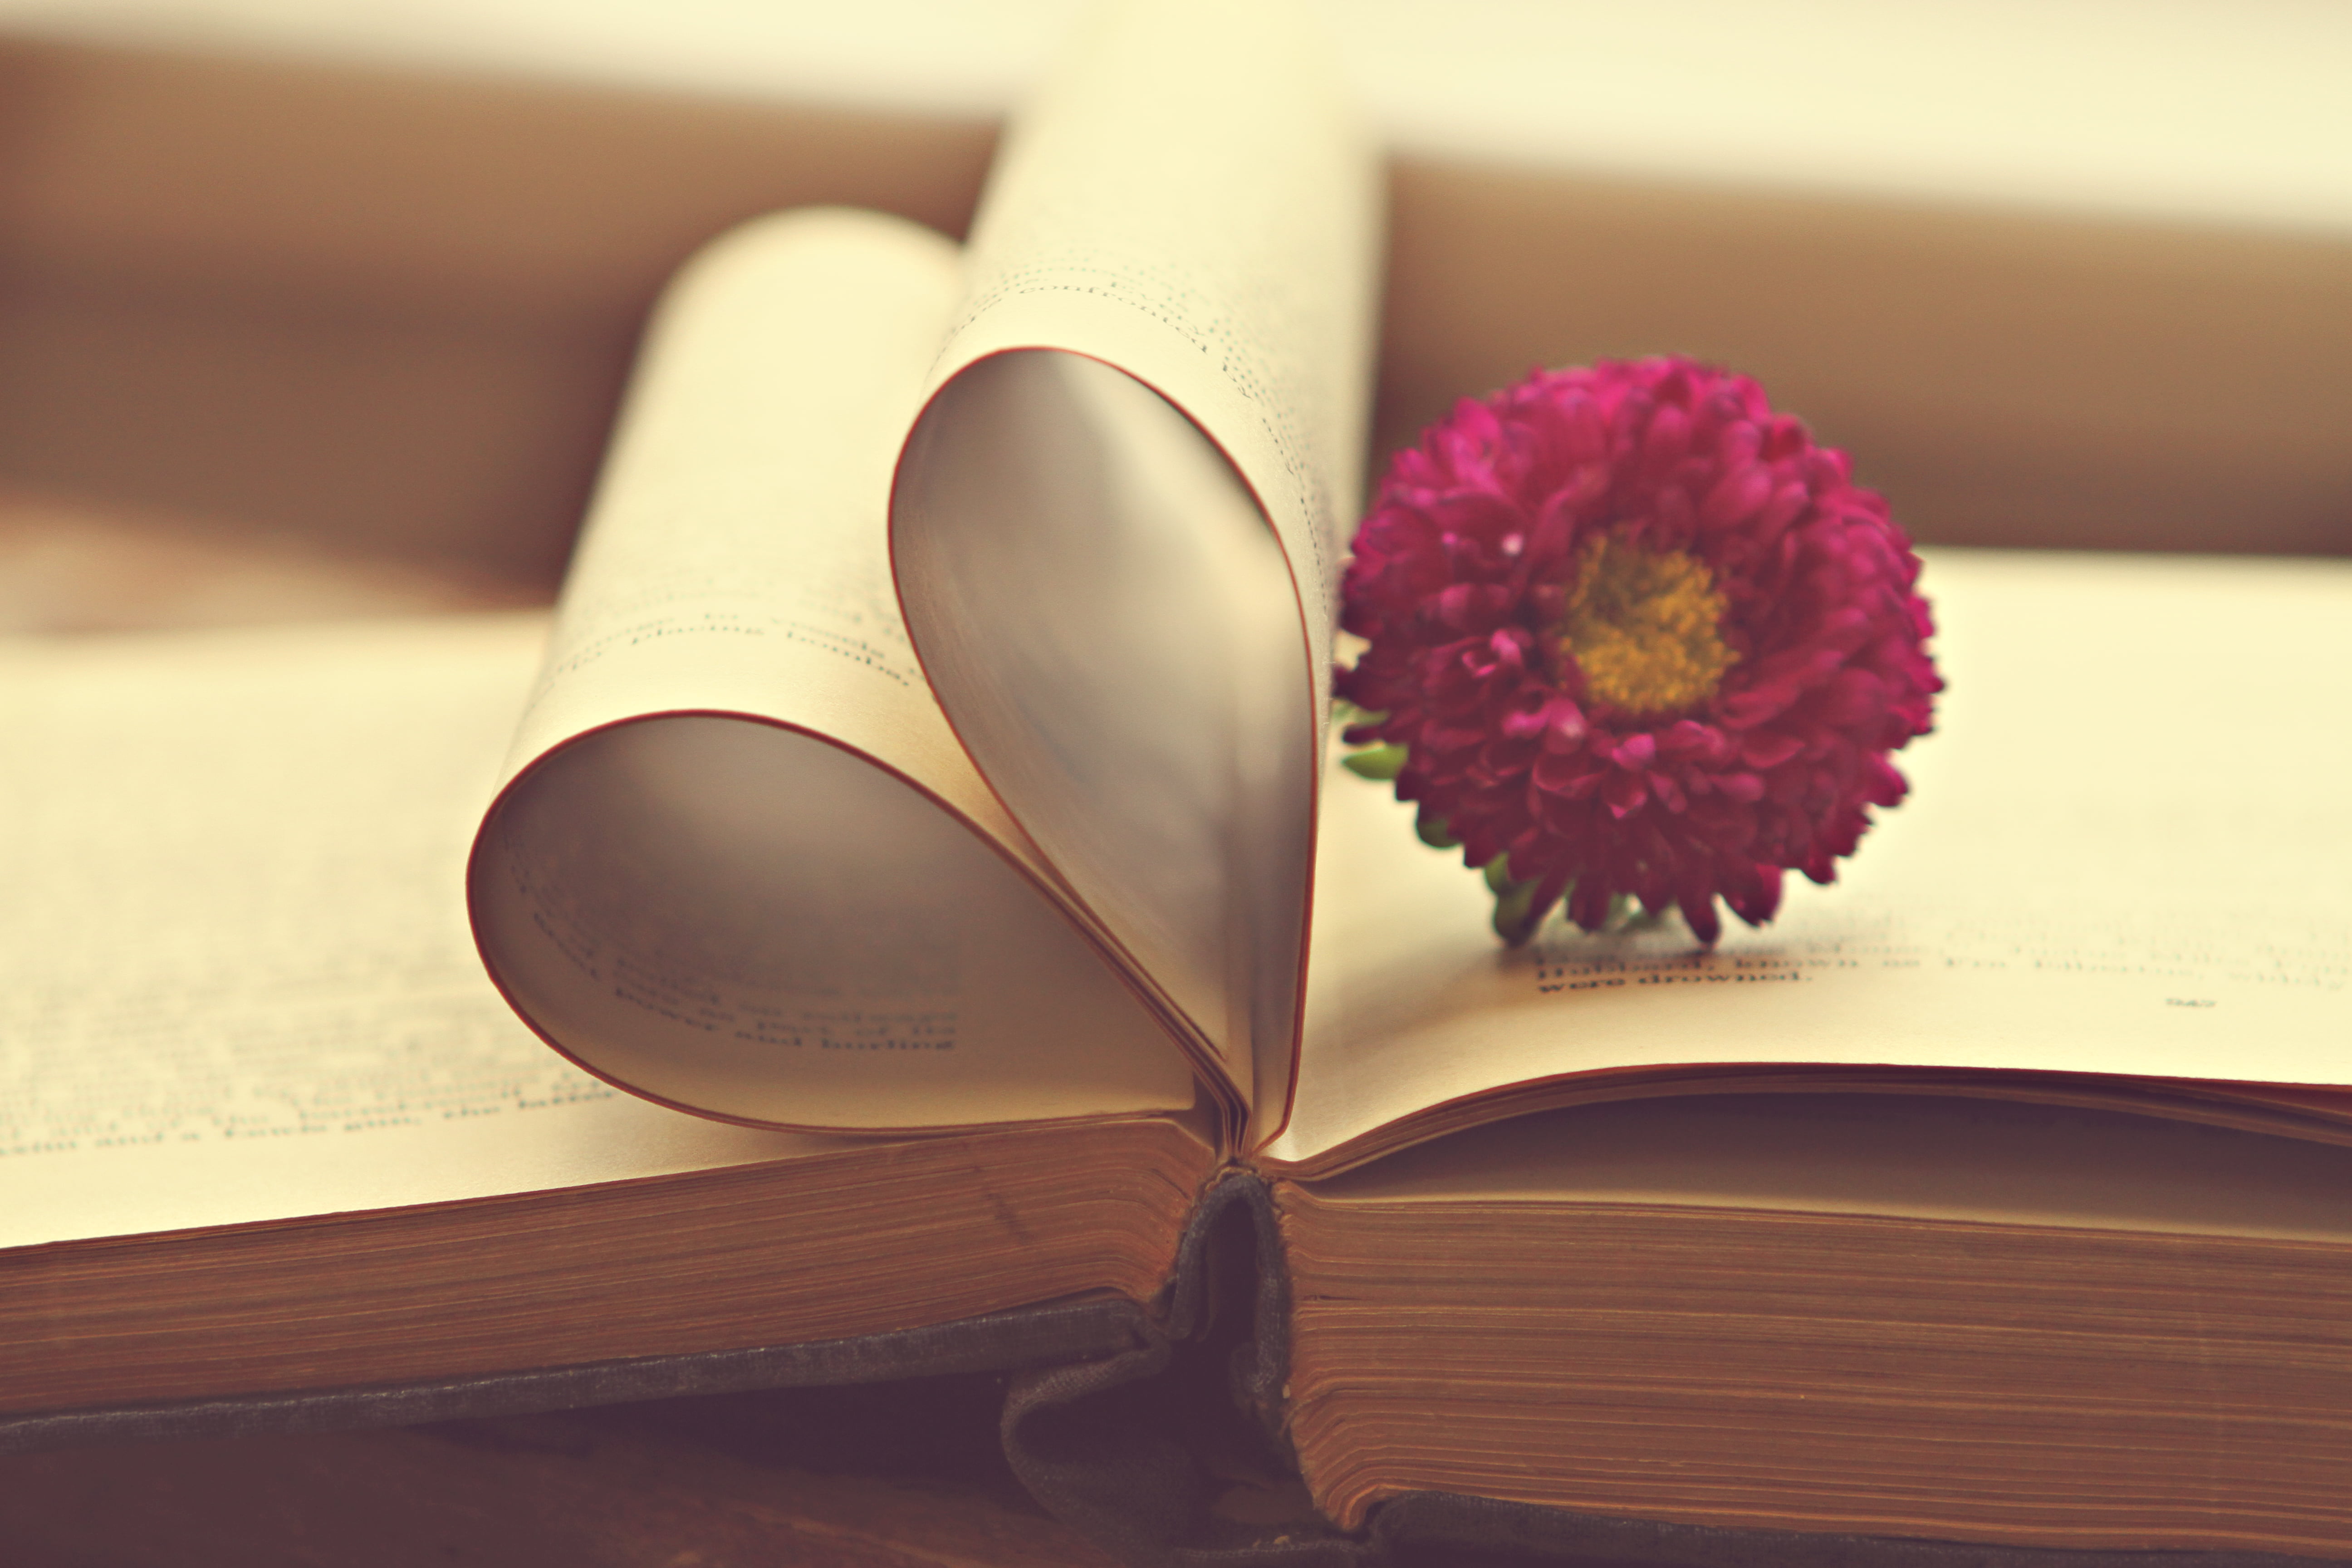 close up photo of pink petaled flower and book